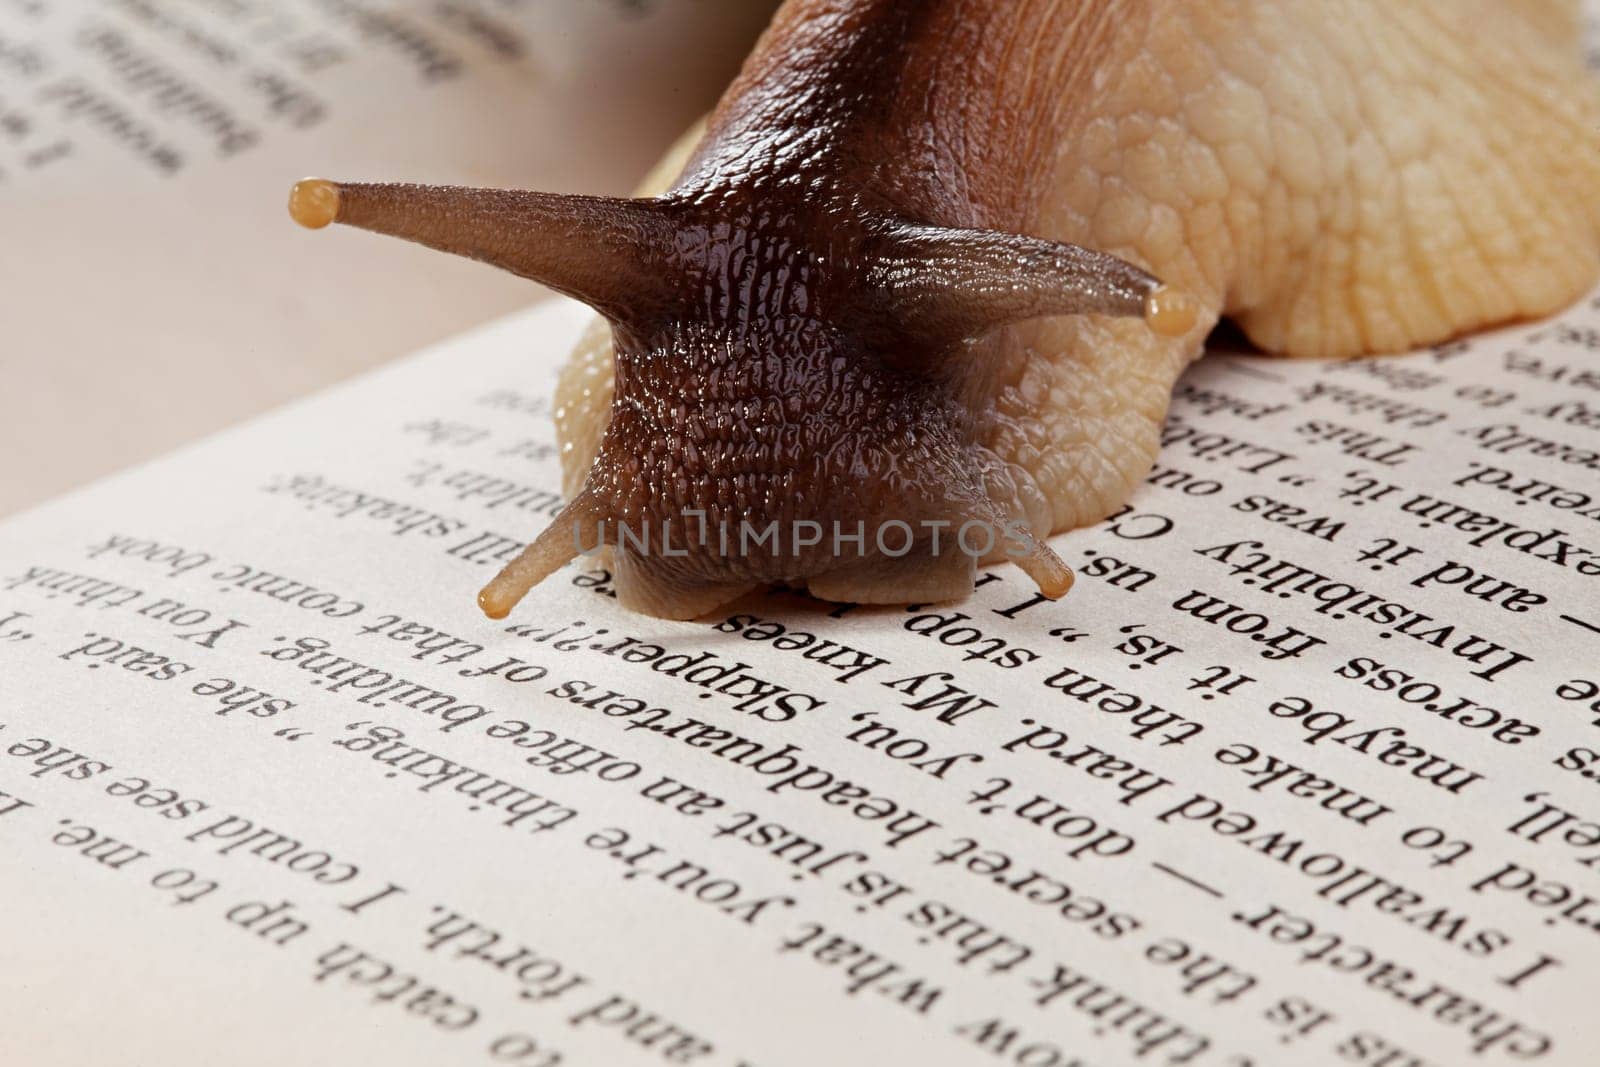 Image of snail crawling on book, close-up